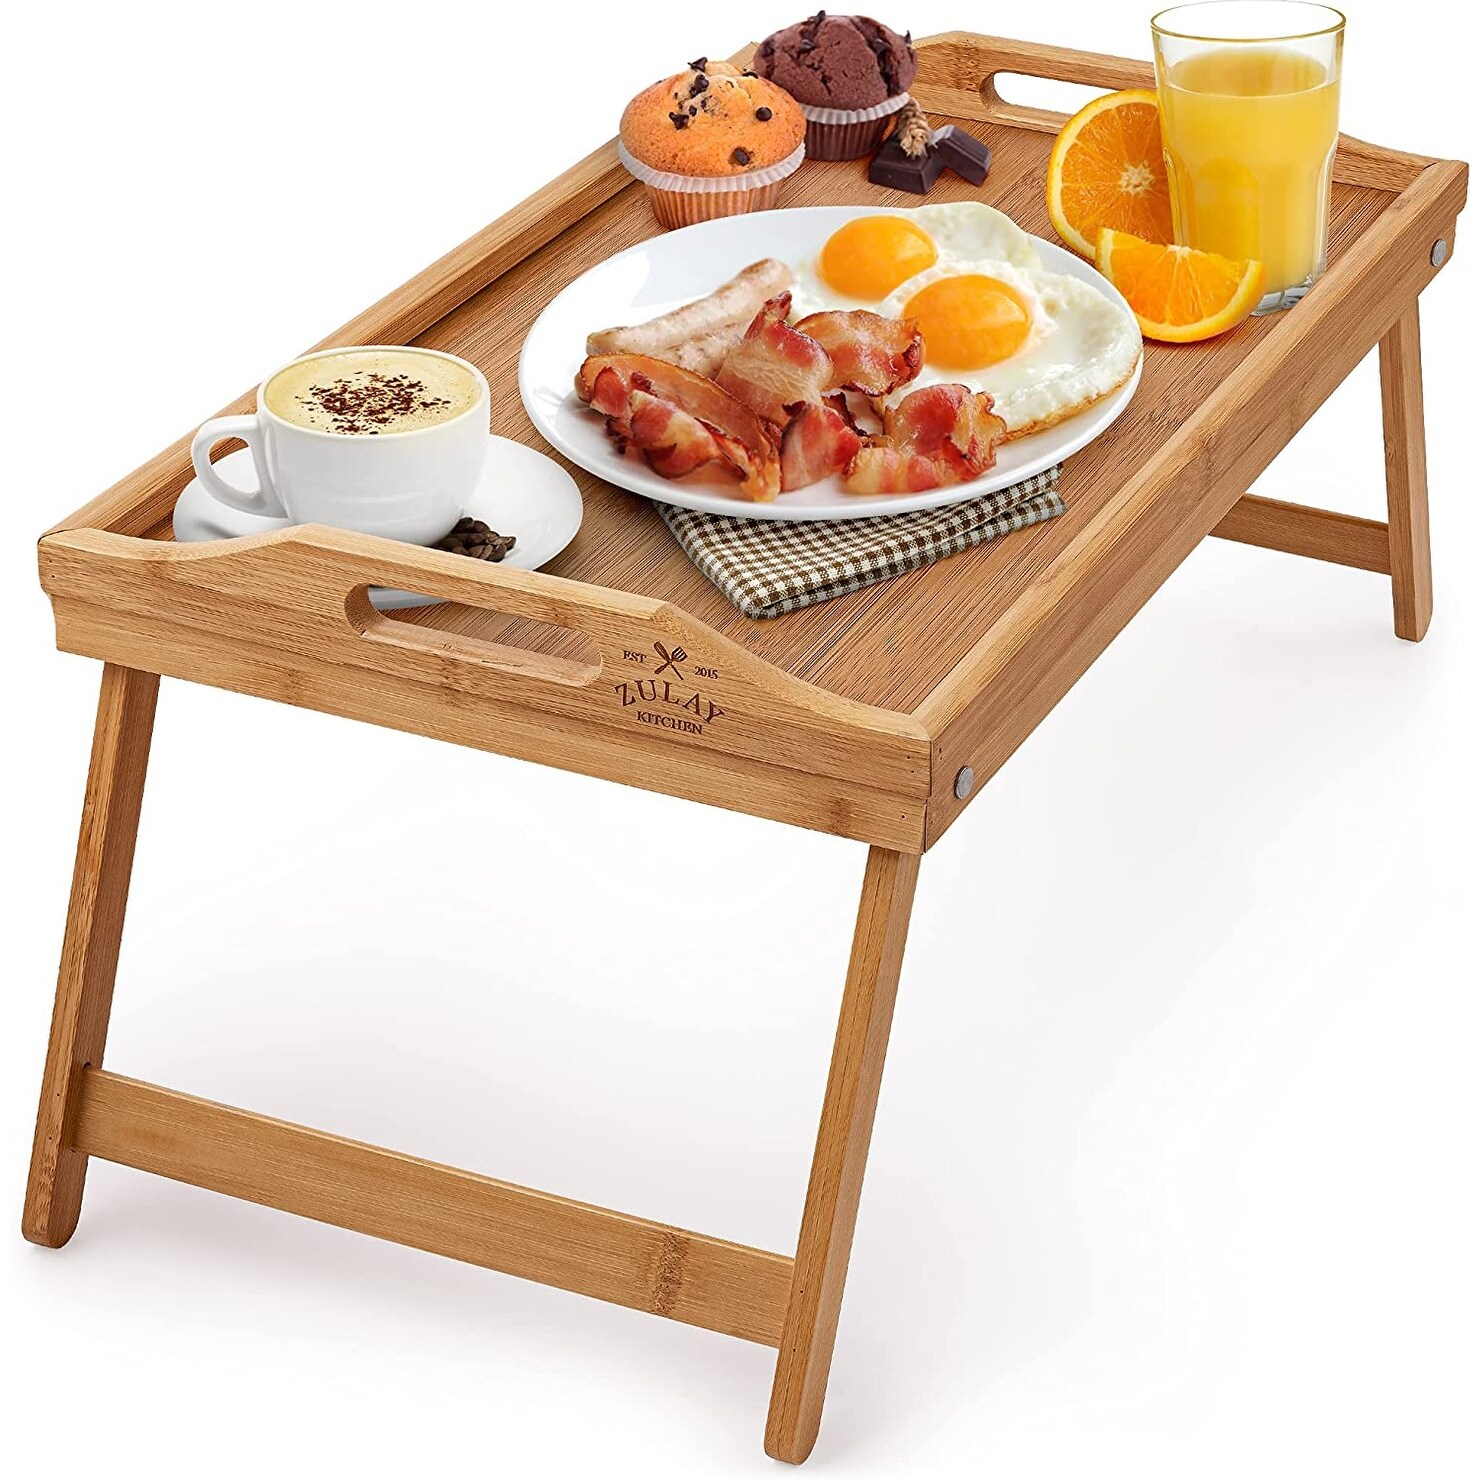 https://ak1.ostkcdn.com/images/products/is/images/direct/f8af667f59ab86563c5c74964917f79606ace98a/Zulay-Kitchen-Breakfast-Tray-with-Folding-Legs---Bamboo.jpg